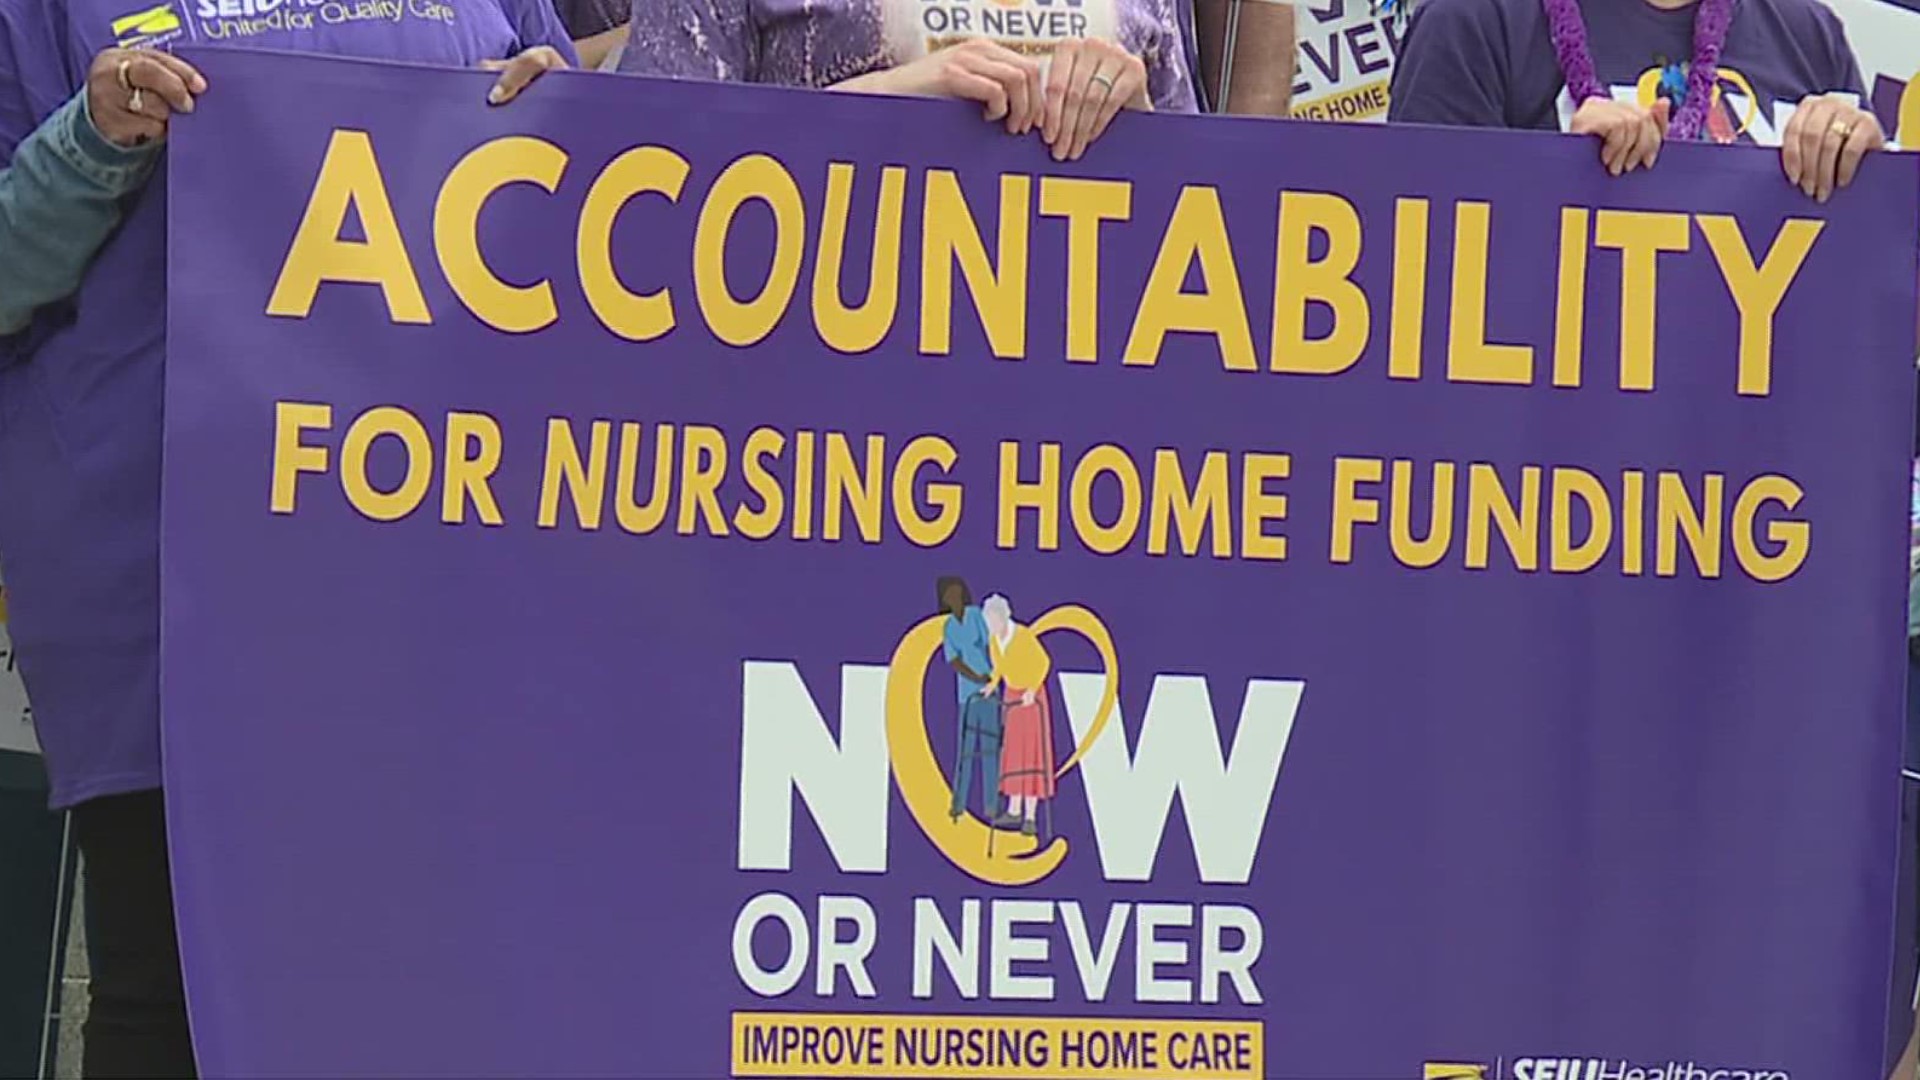 Caregivers are asking for safe patient-to-staff ratios and $300 million permanent and recurring investment into care.